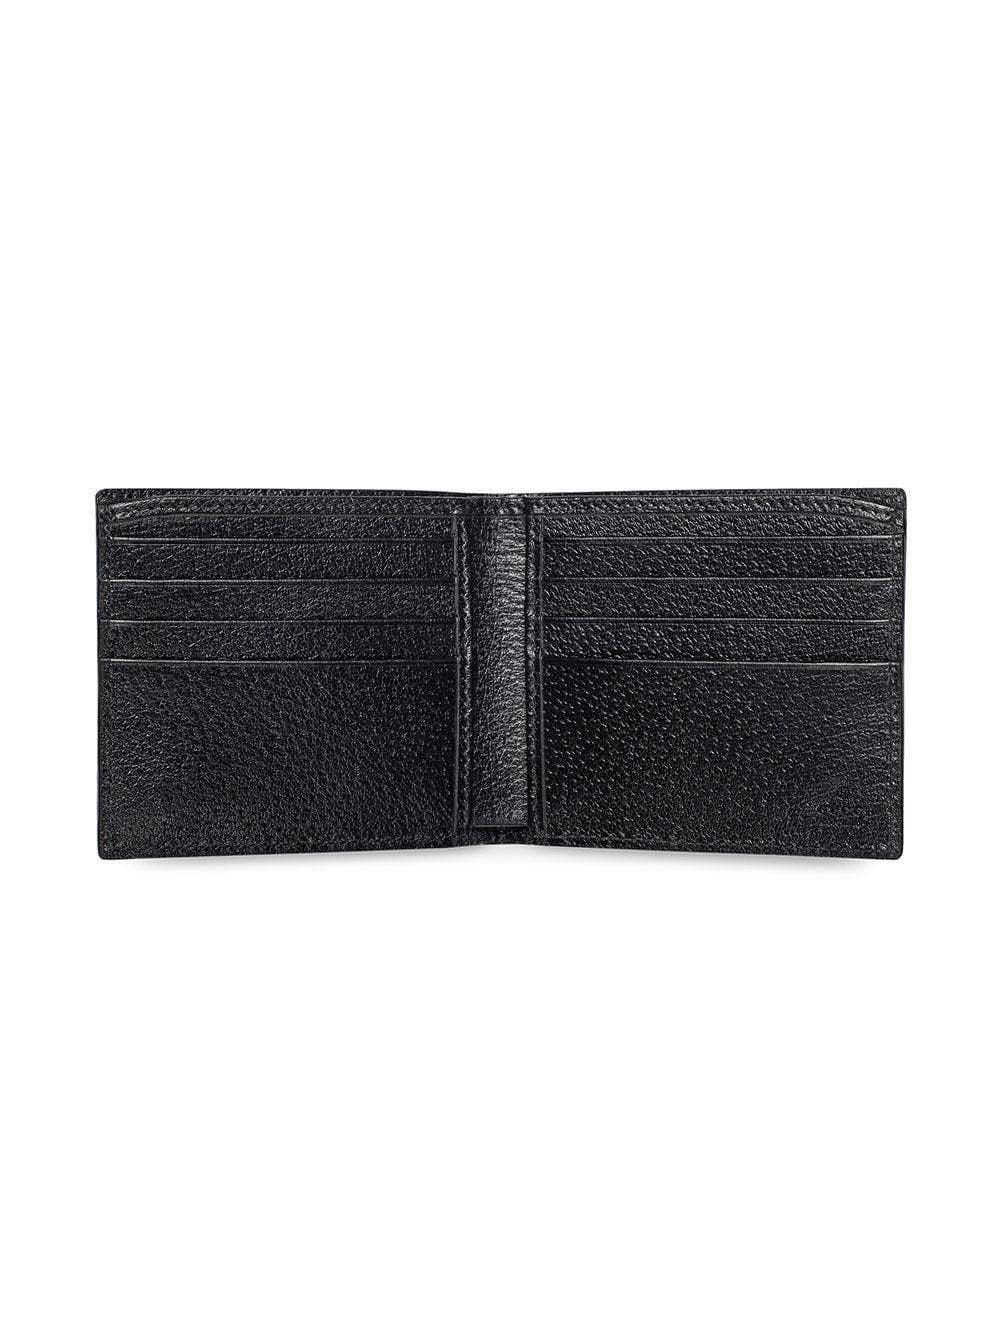 Gucci GG Marmont Leather Bi-fold Wallet in Black for Men - Save 2% | Lyst